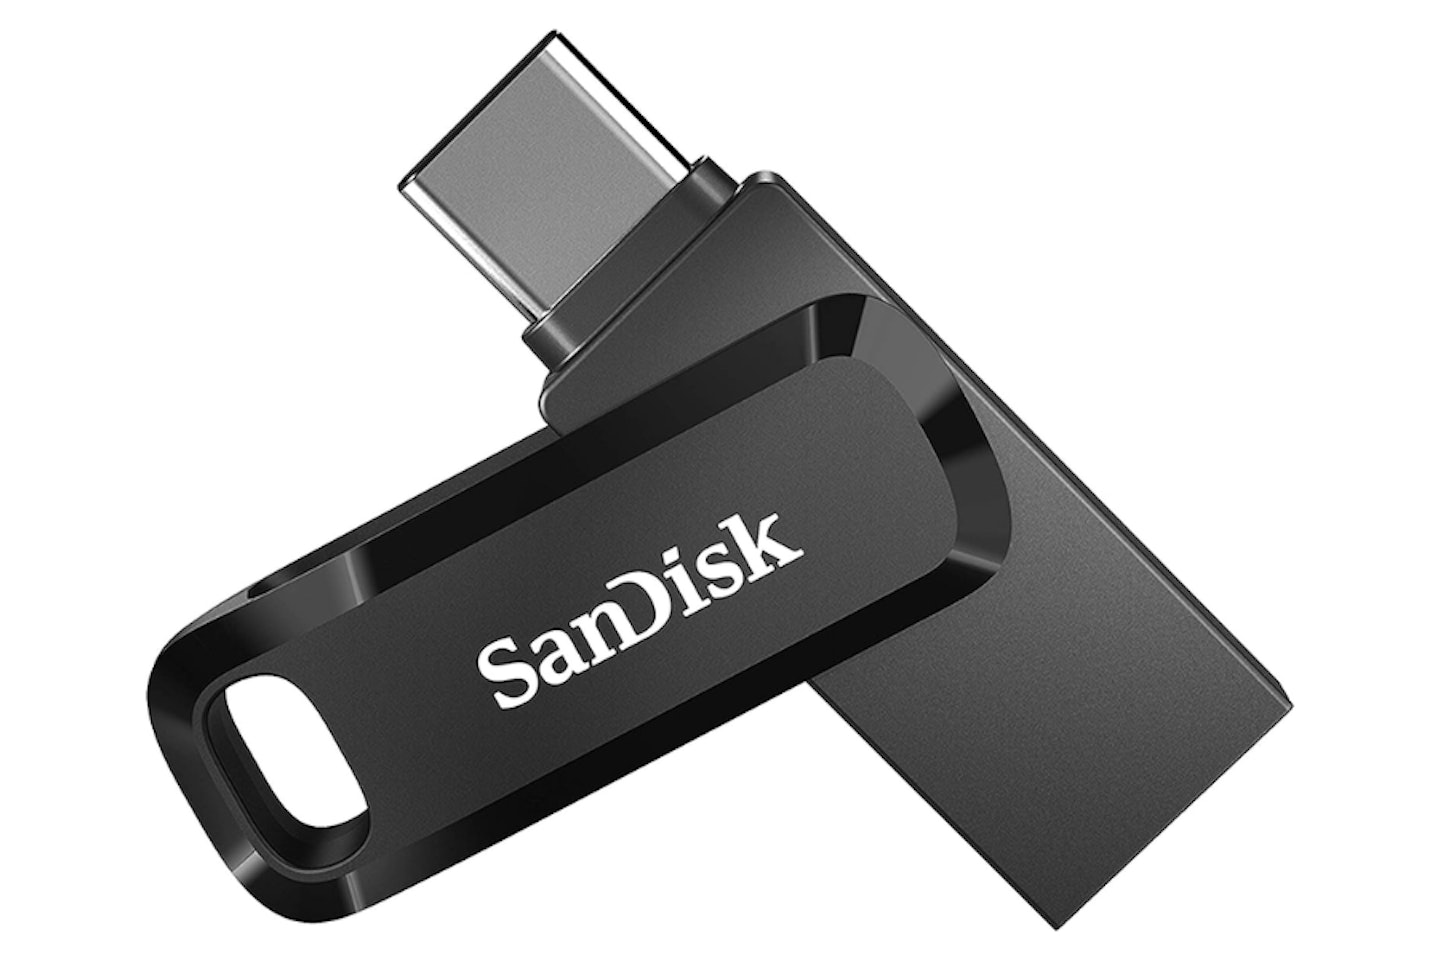 SanDisk 512GB Ultra Dual Drive Go - one of the best SanDisk USB stick devices